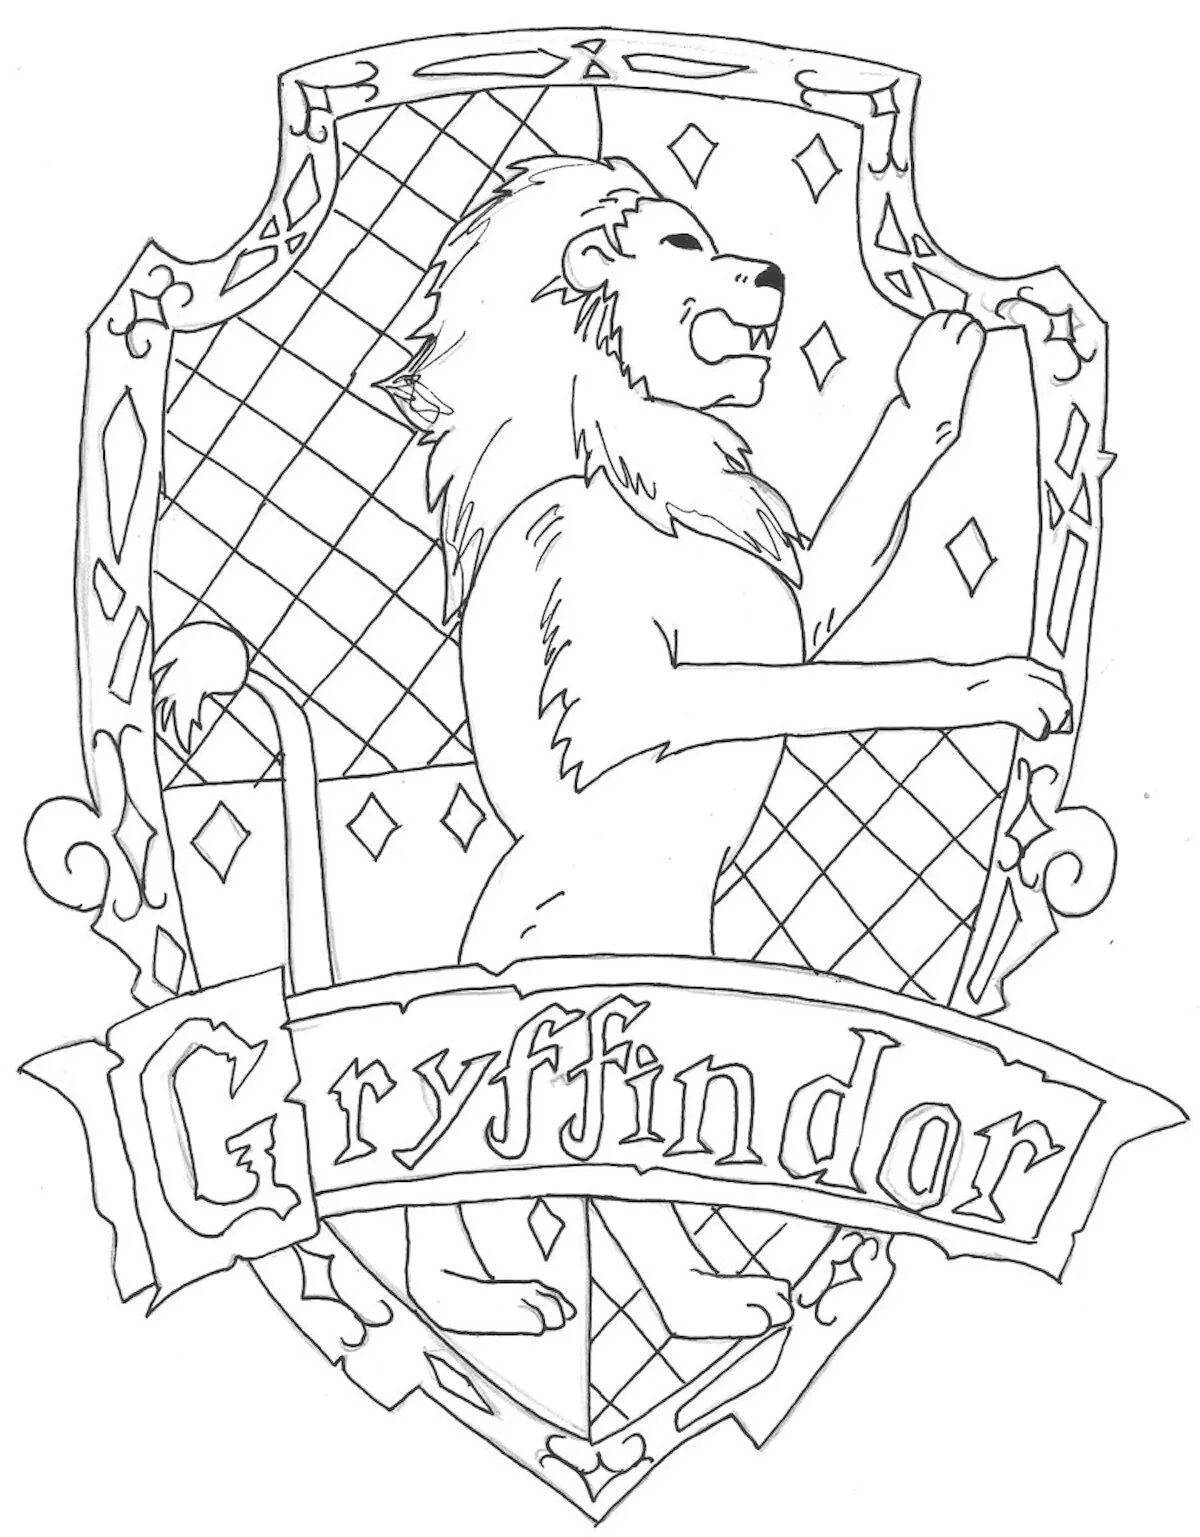 Great slytherin coat of arms coloring page